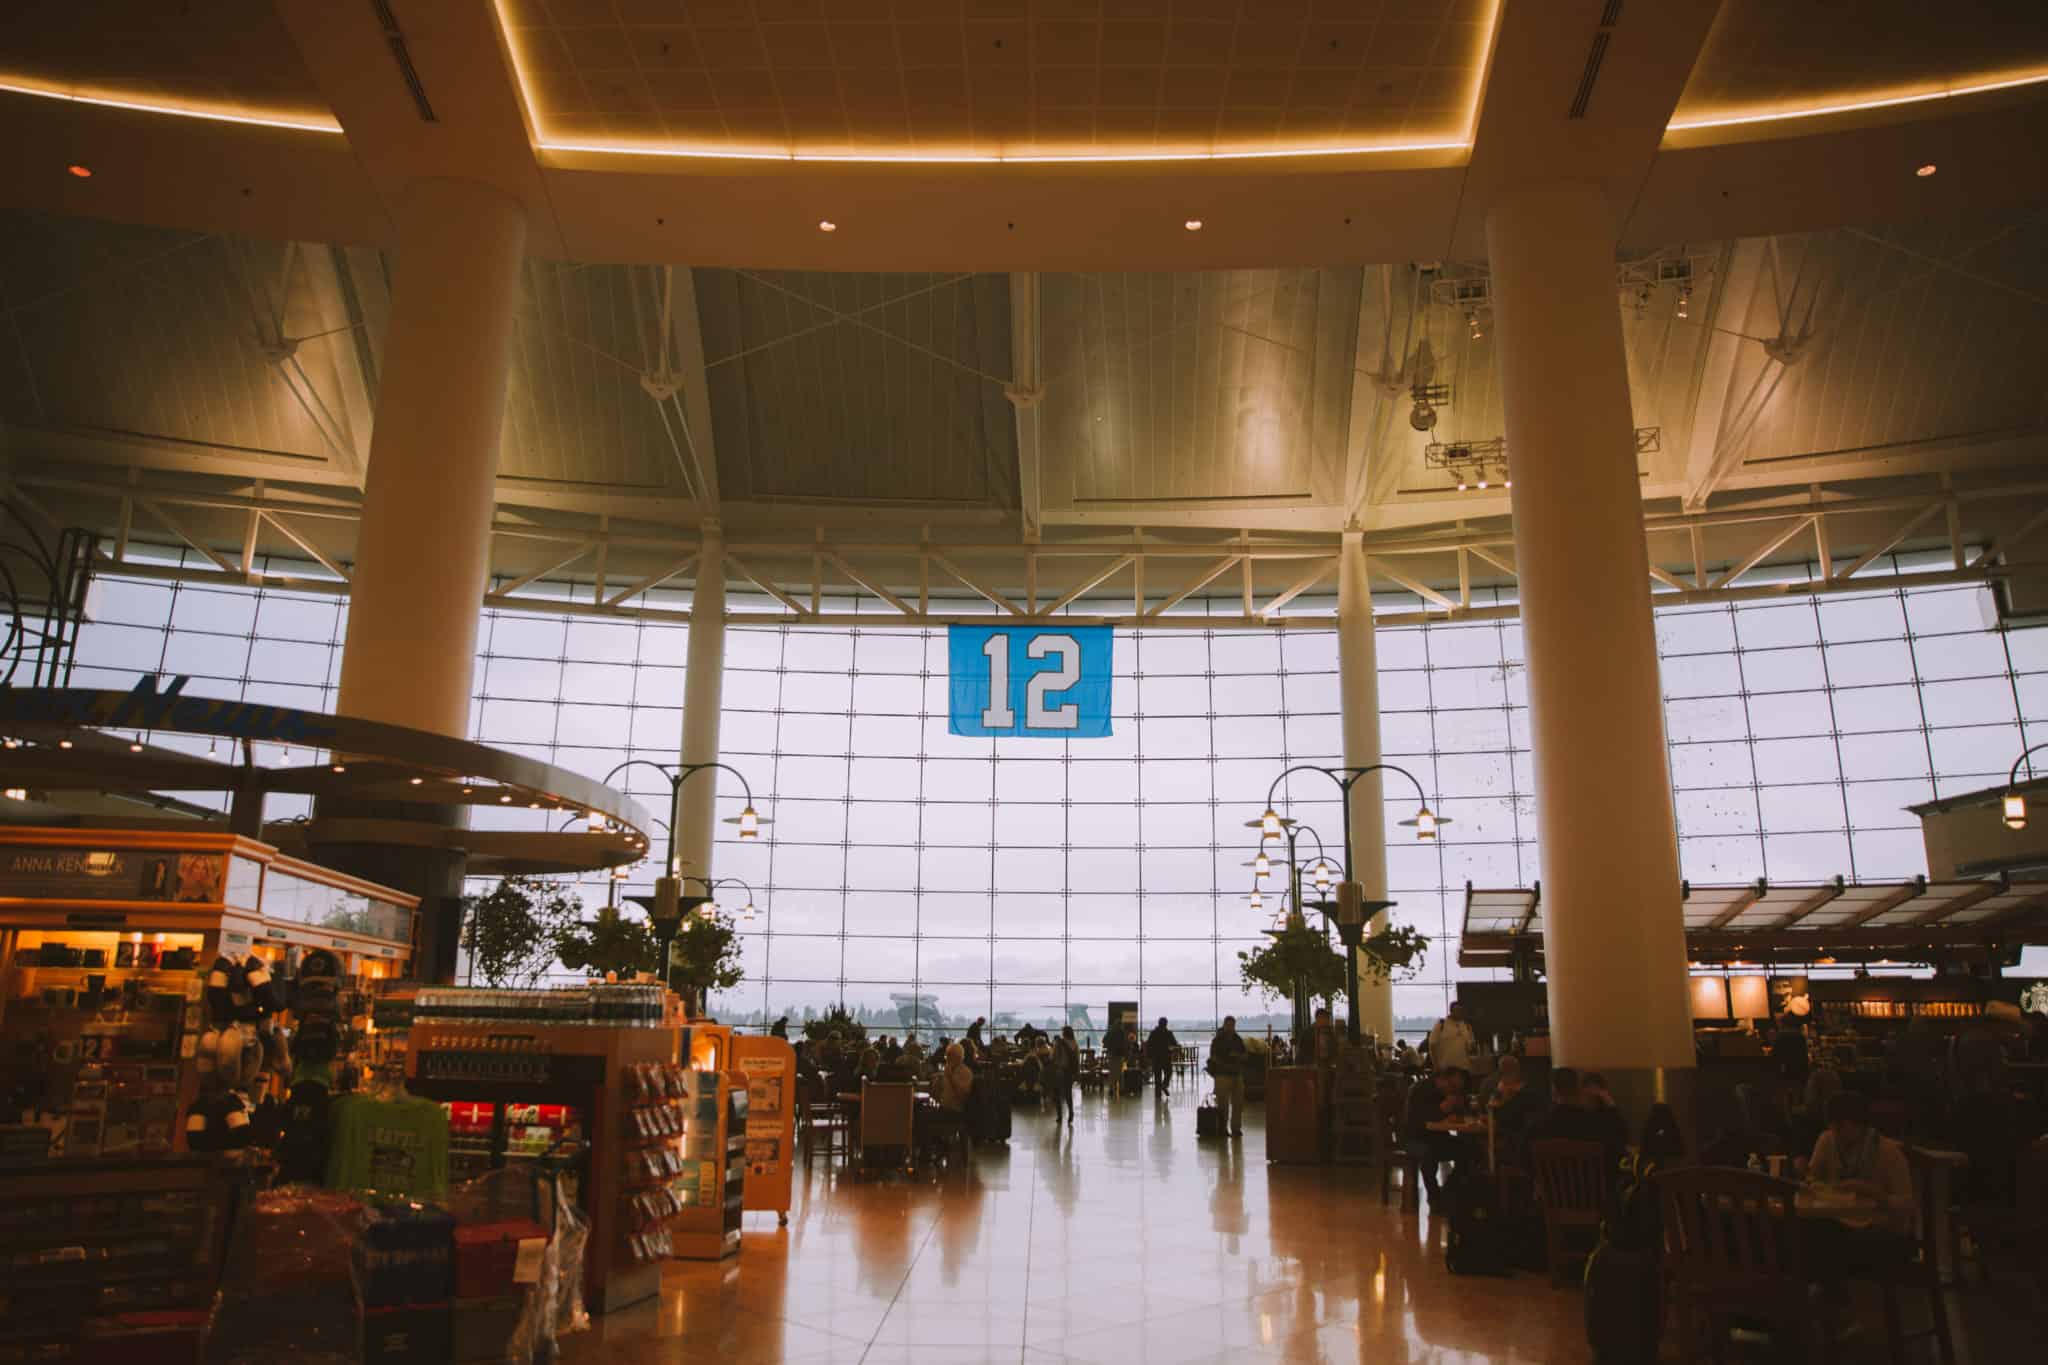 Dreading your flight for Christmas? Stressing out about holiday crowds? We're sharing our complete list of surviving the airport during the holidays!